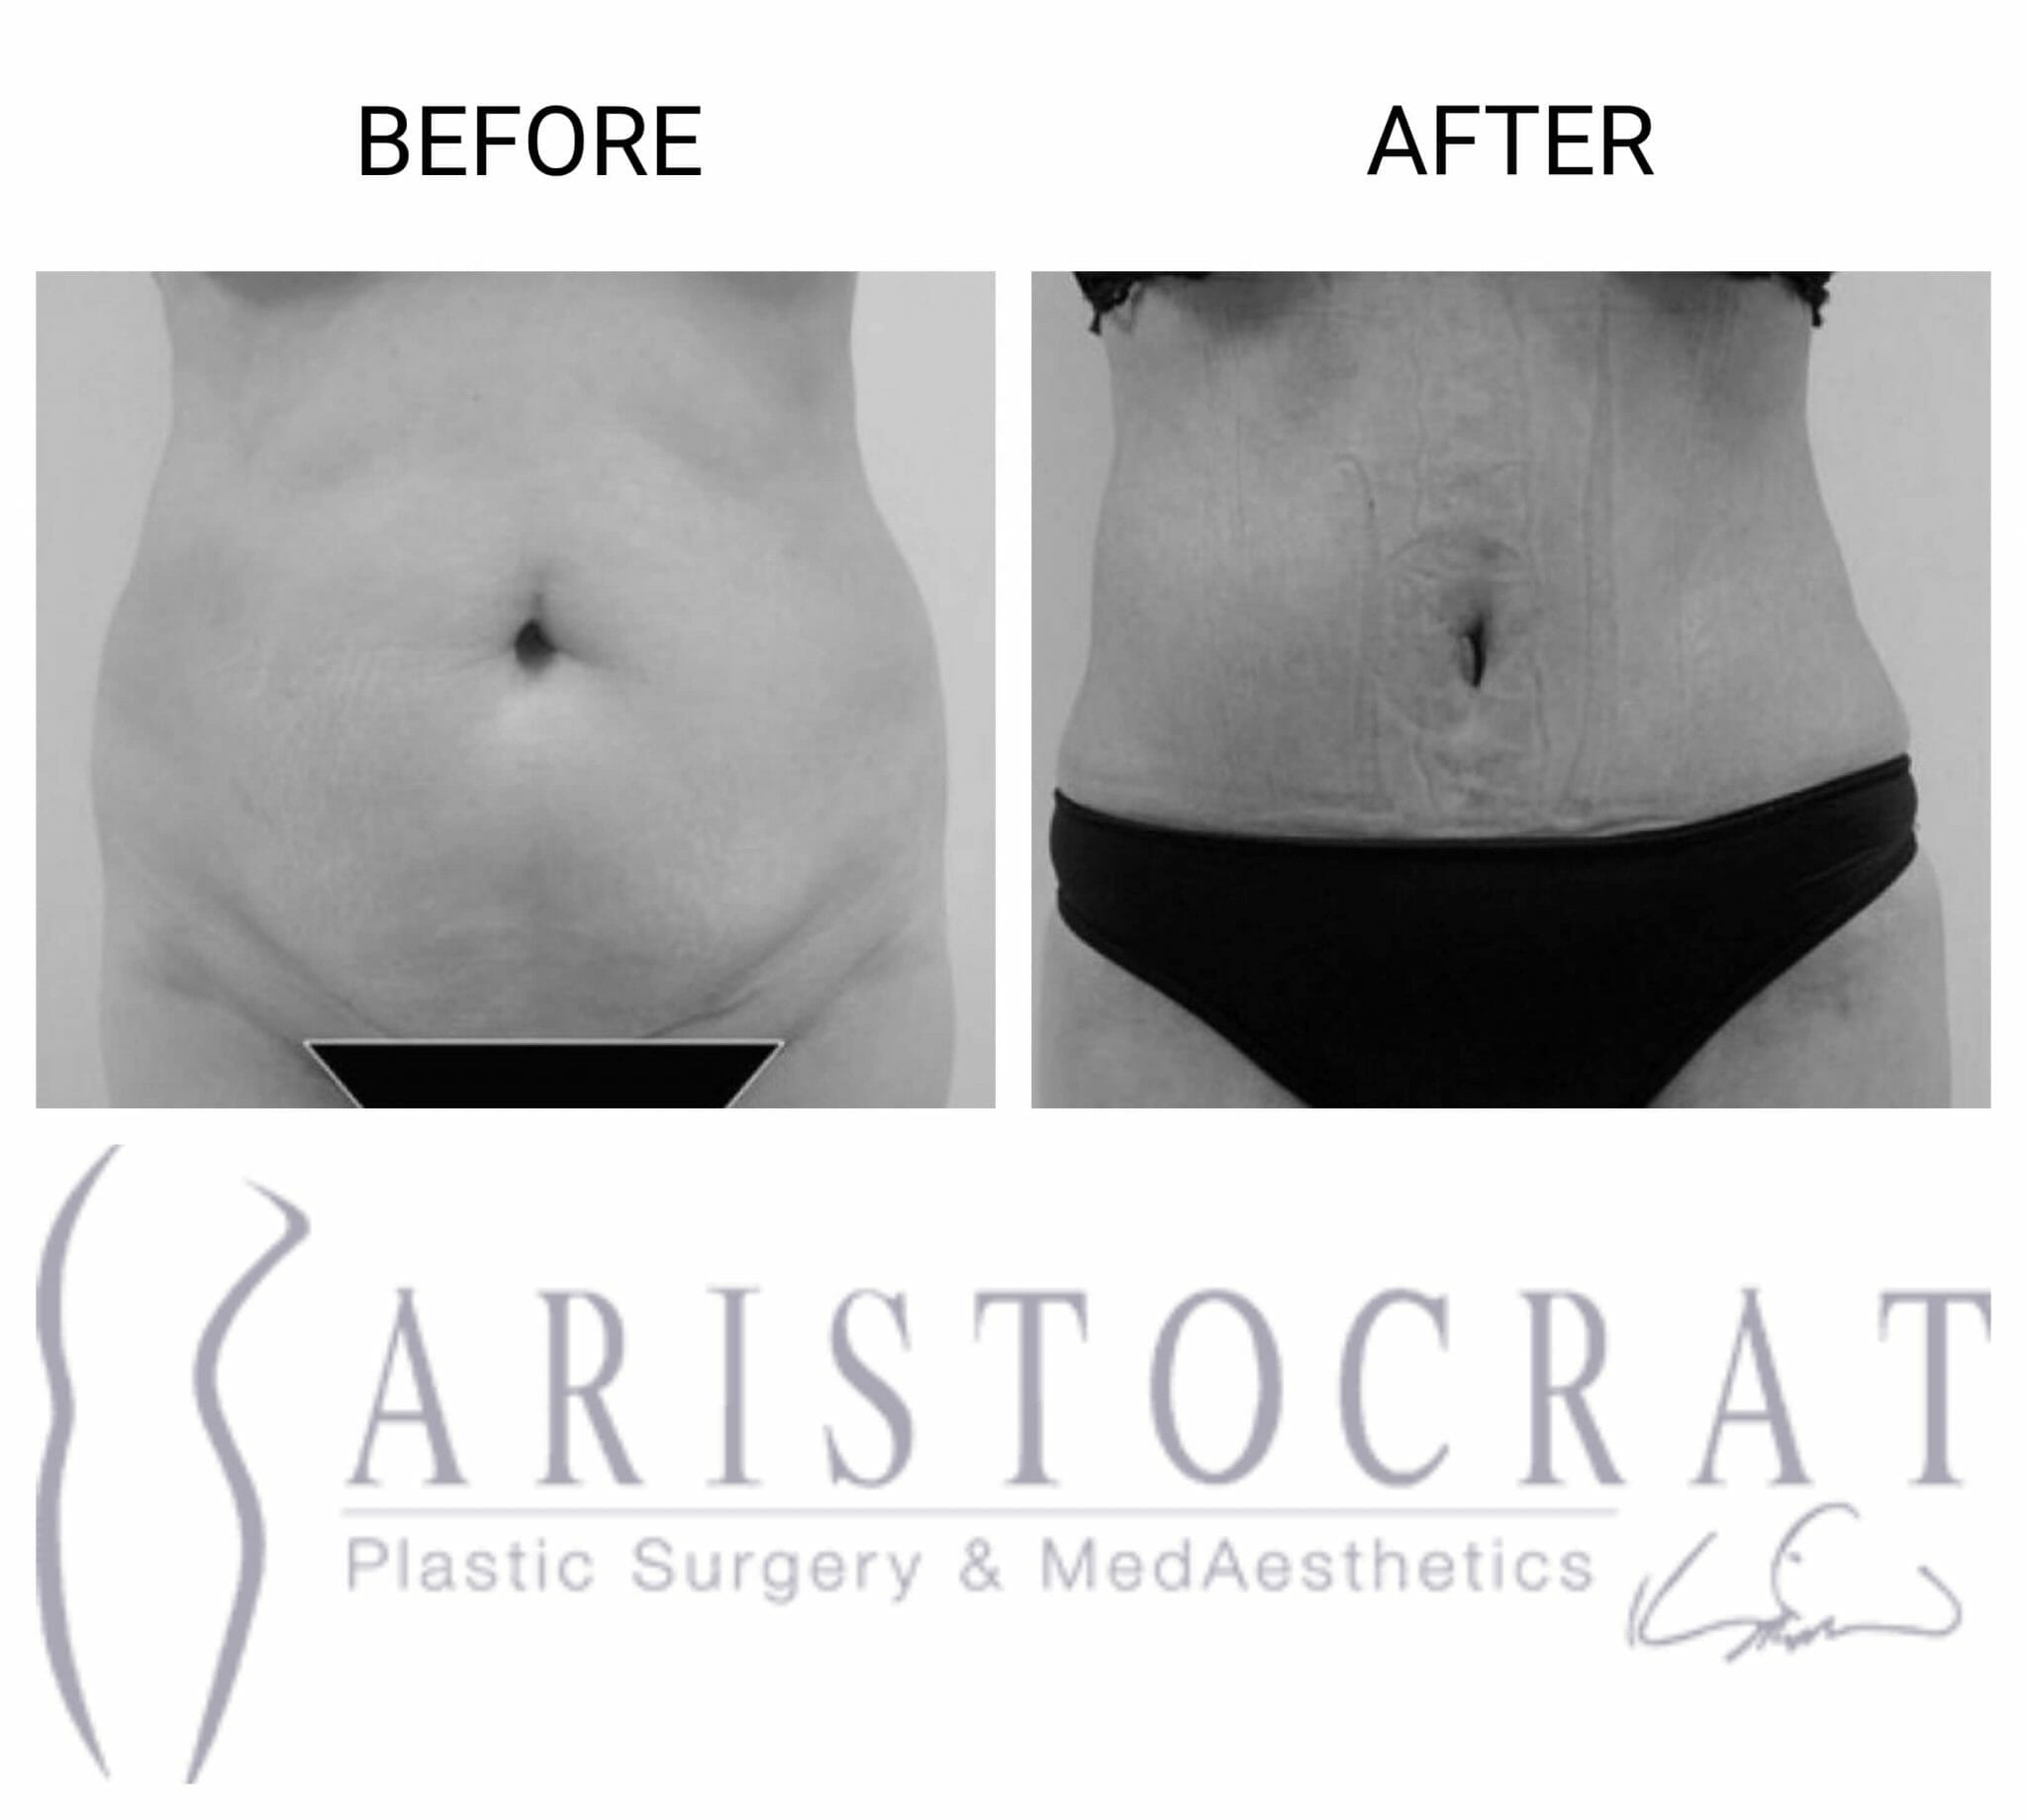 Abdomen and Waist Liposuction - Before and After Photos